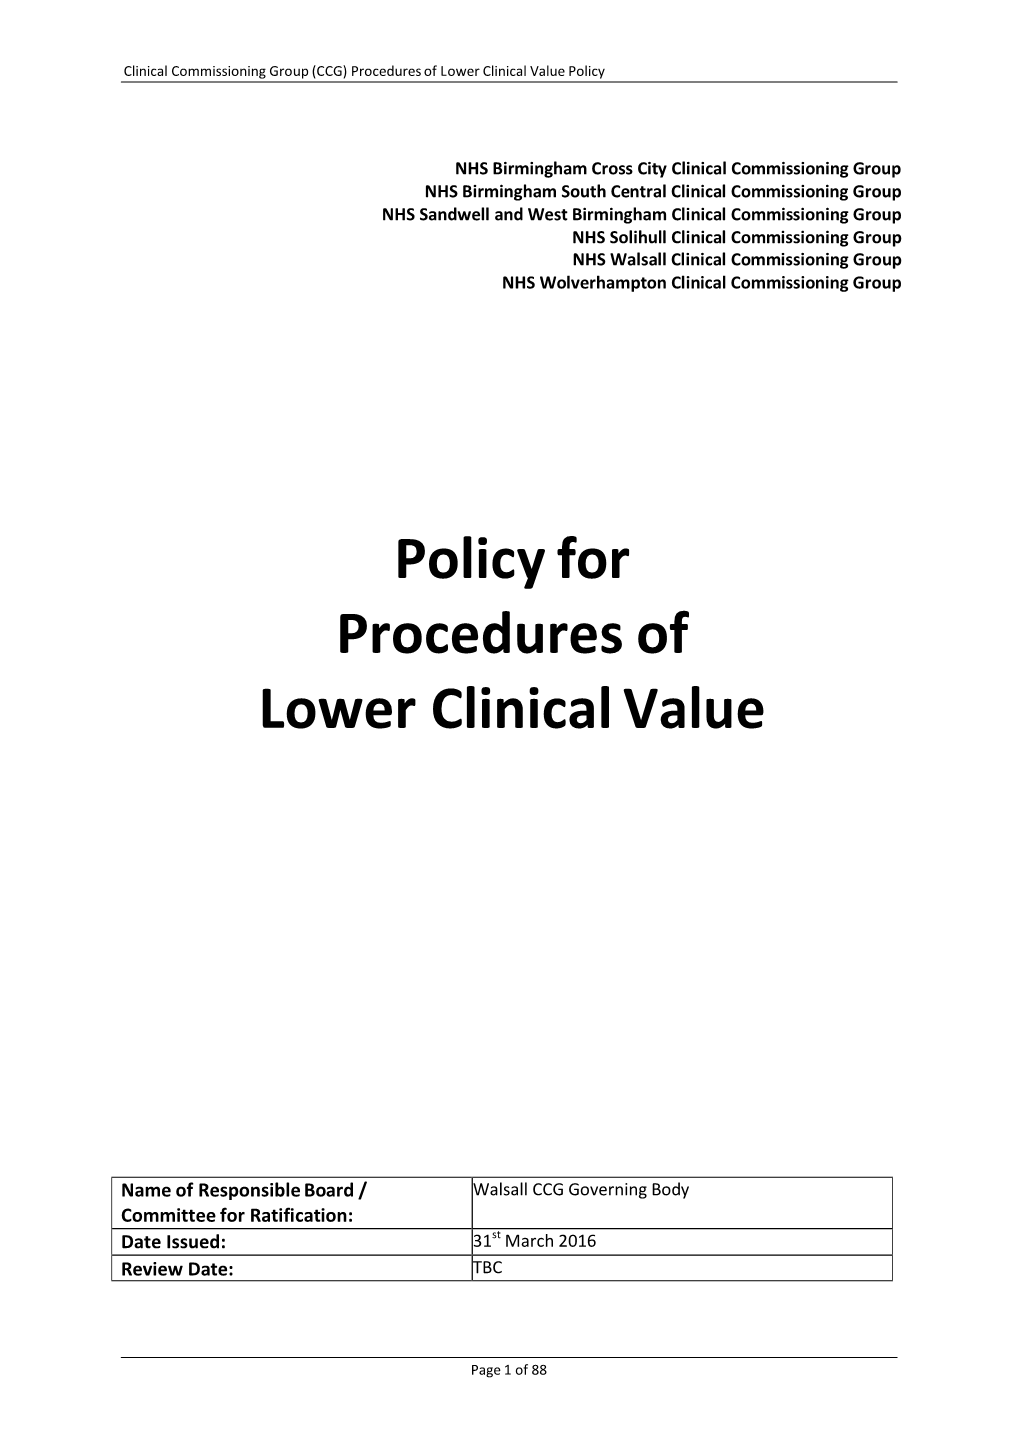 Policy for Procedures of Lower Clinical Value